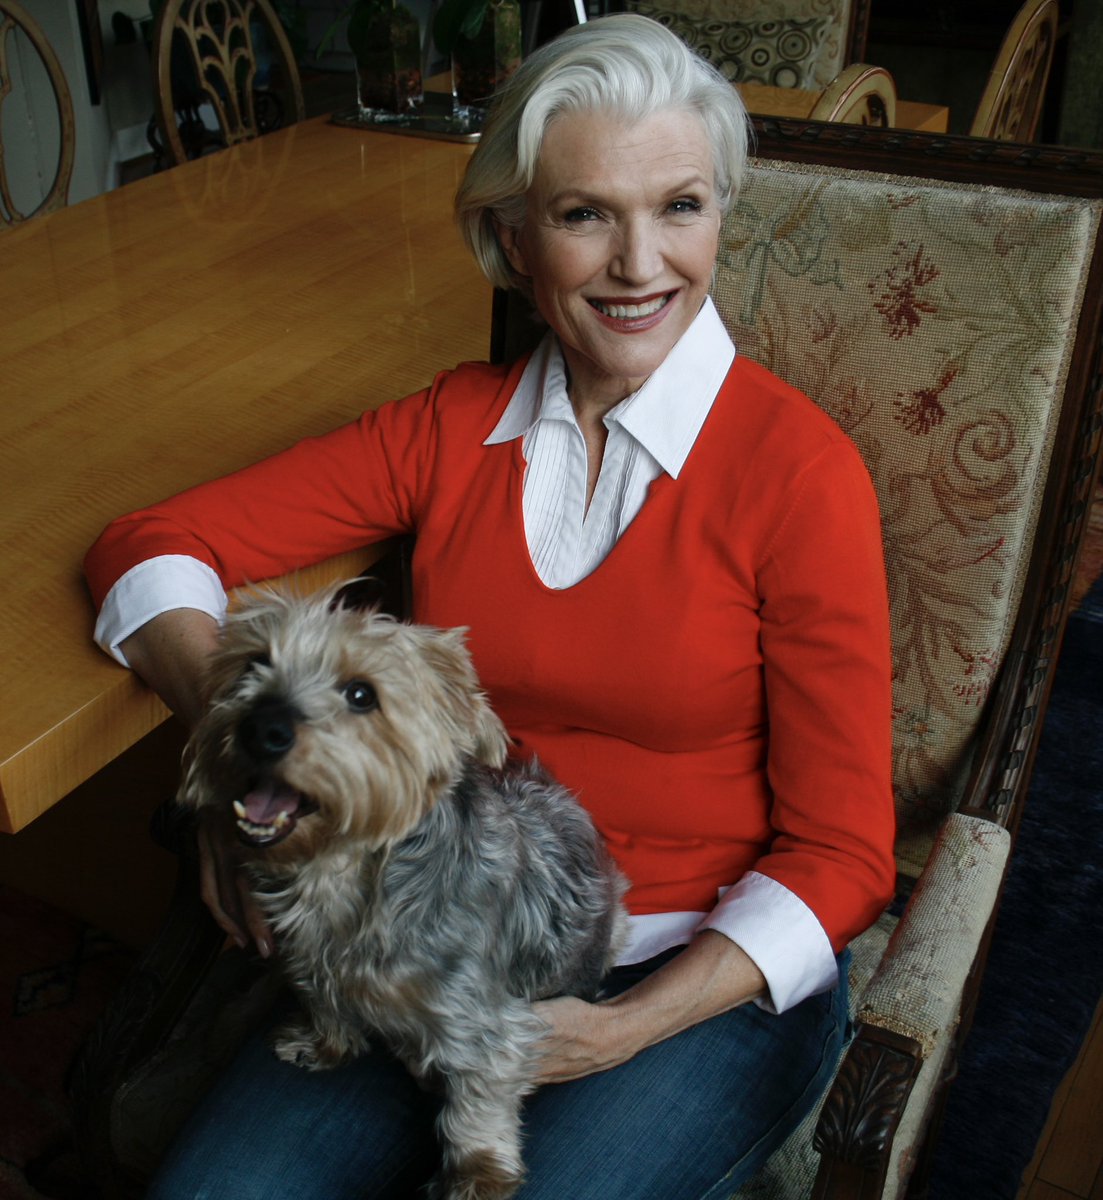 Throwin' it back with this gem. Flashback Thursday just chilling with Maye Musk. $Hobbes is the true Elon Musk OG dog …the narrative is strong! Grab a 💼 and let’s 🚀🚀!